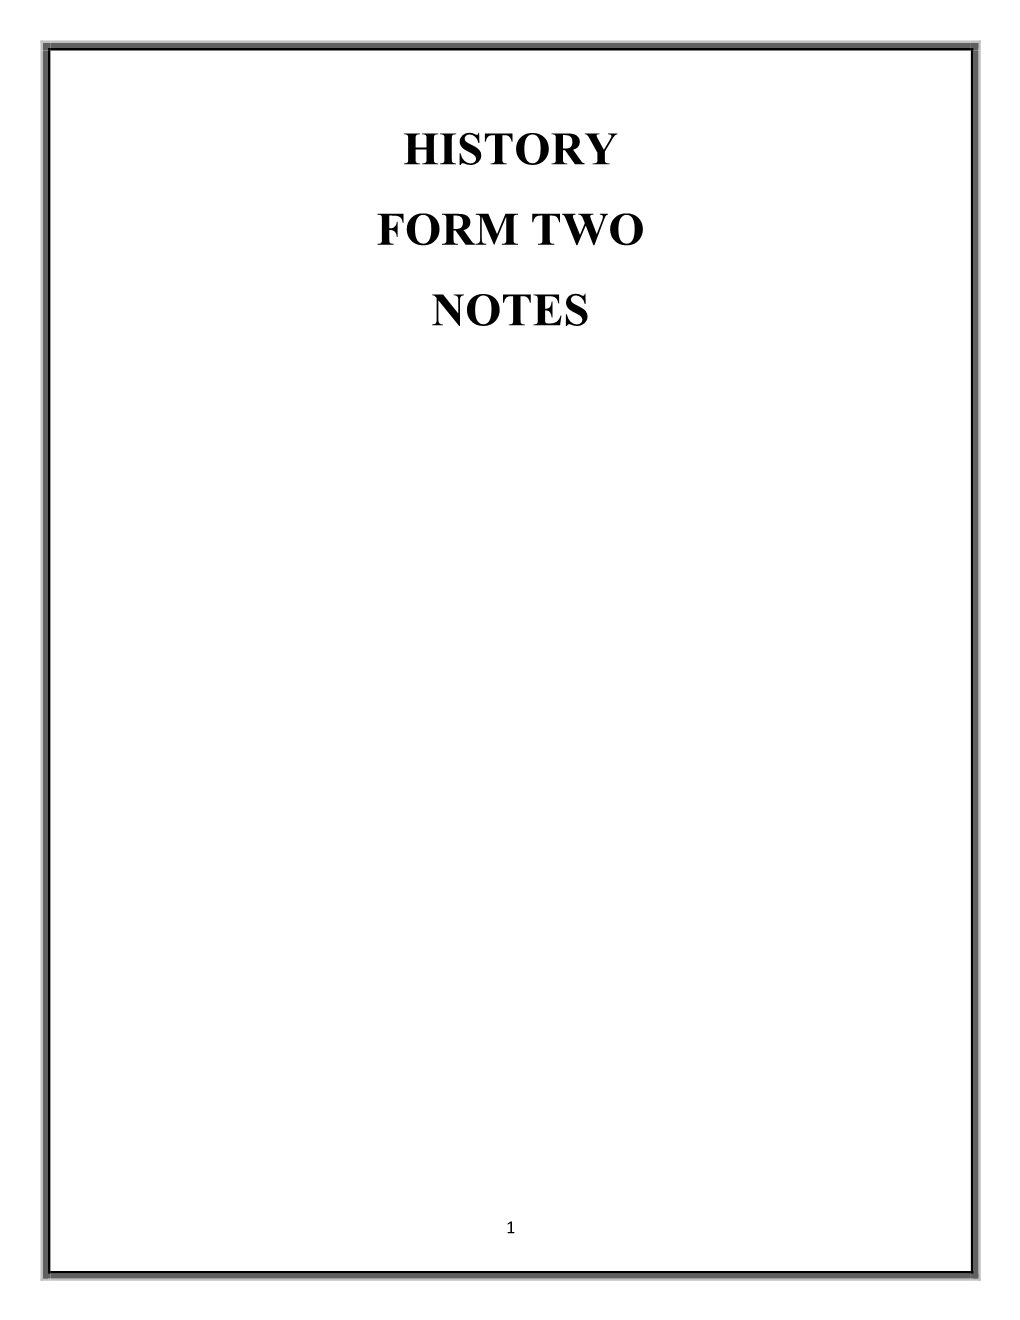 History Form Two Notes